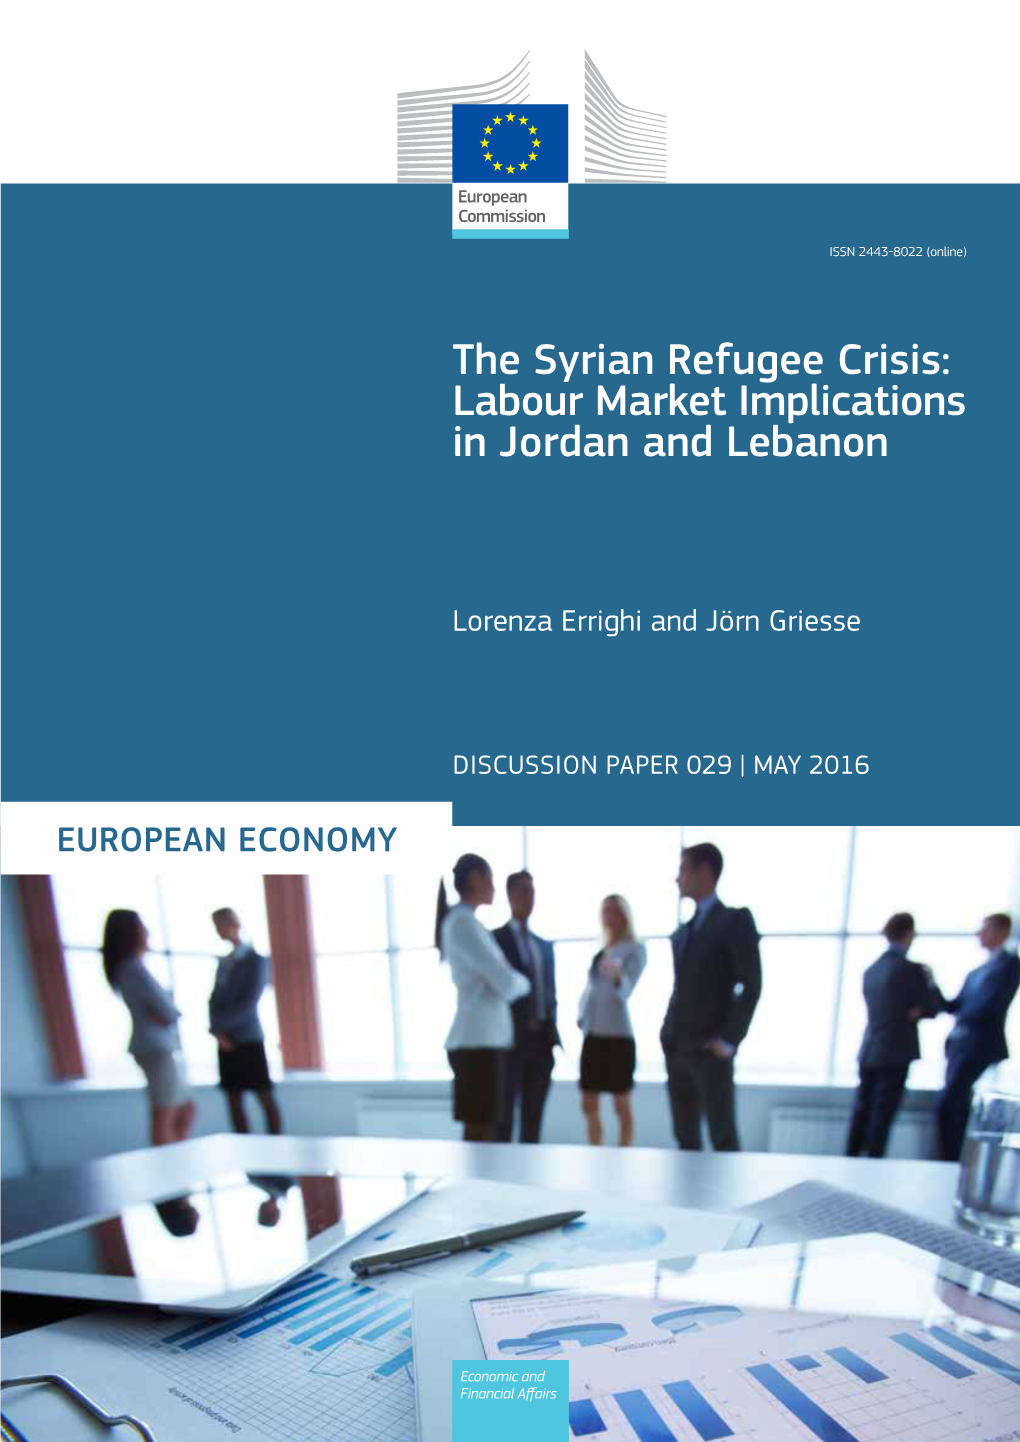 The Syrian Refugee Crisis: Labour Market Implications in Jordan and Lebanon